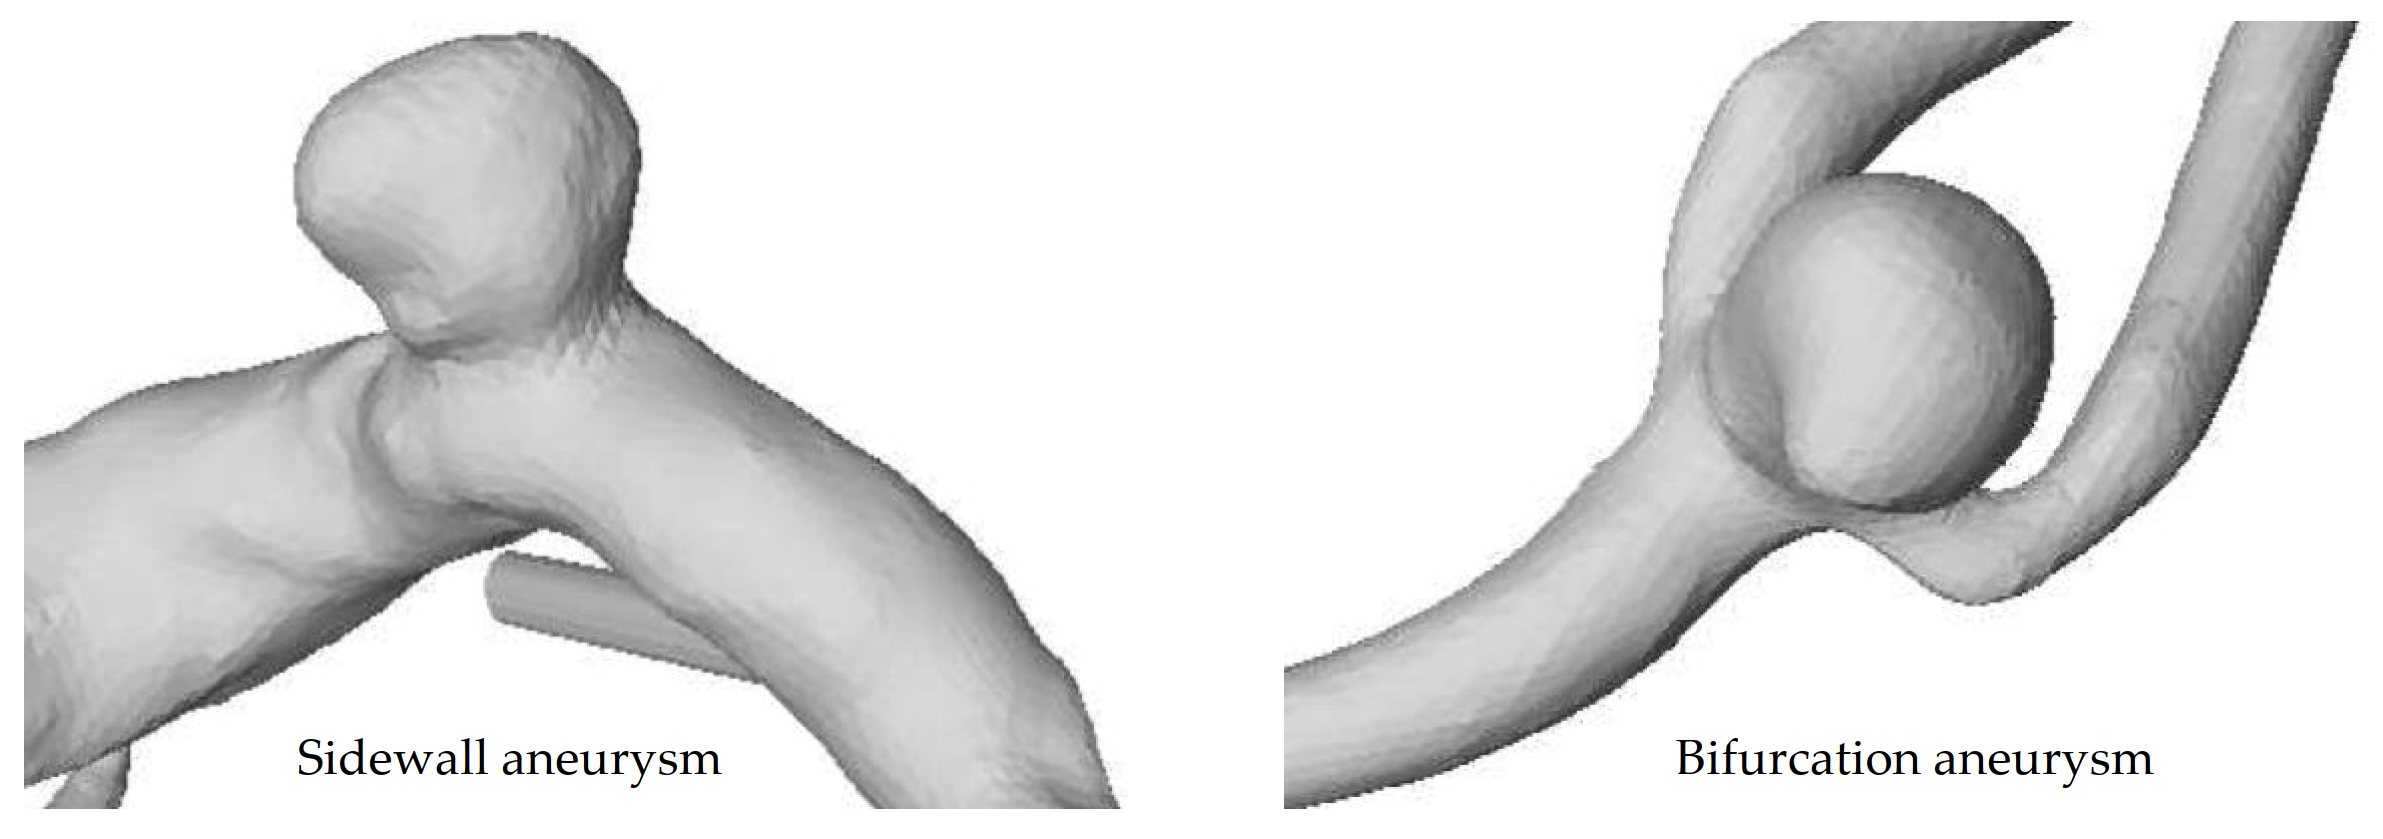 Sidewall and bifurcation aneurysms. Illustration of an aneurysm at the side of the parent vessel wall (left) and an aneurysm at a vessel bifurcation (right). The figure is adapted from [32].